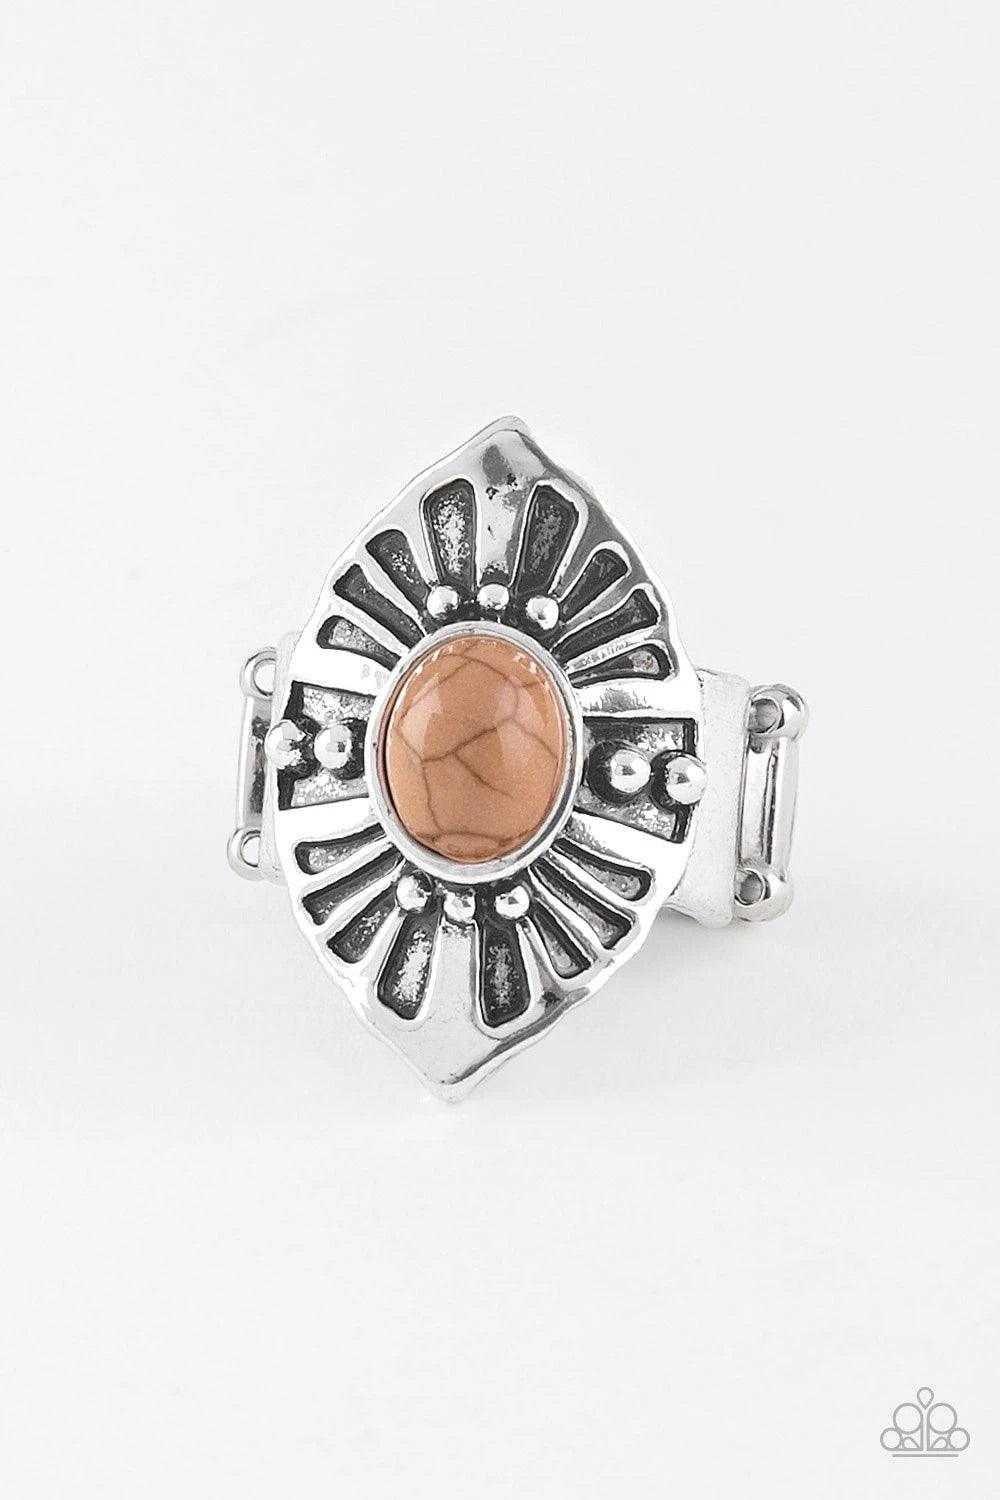 Paparazzi Accessories HOMESTEAD For The Weekend - Brown An earthy brown stone bead is pressed into the center of an angular silver frame radiating with studded and antiqued textures. Features a stretchy band for a flexible fit. Sold as one individual ring